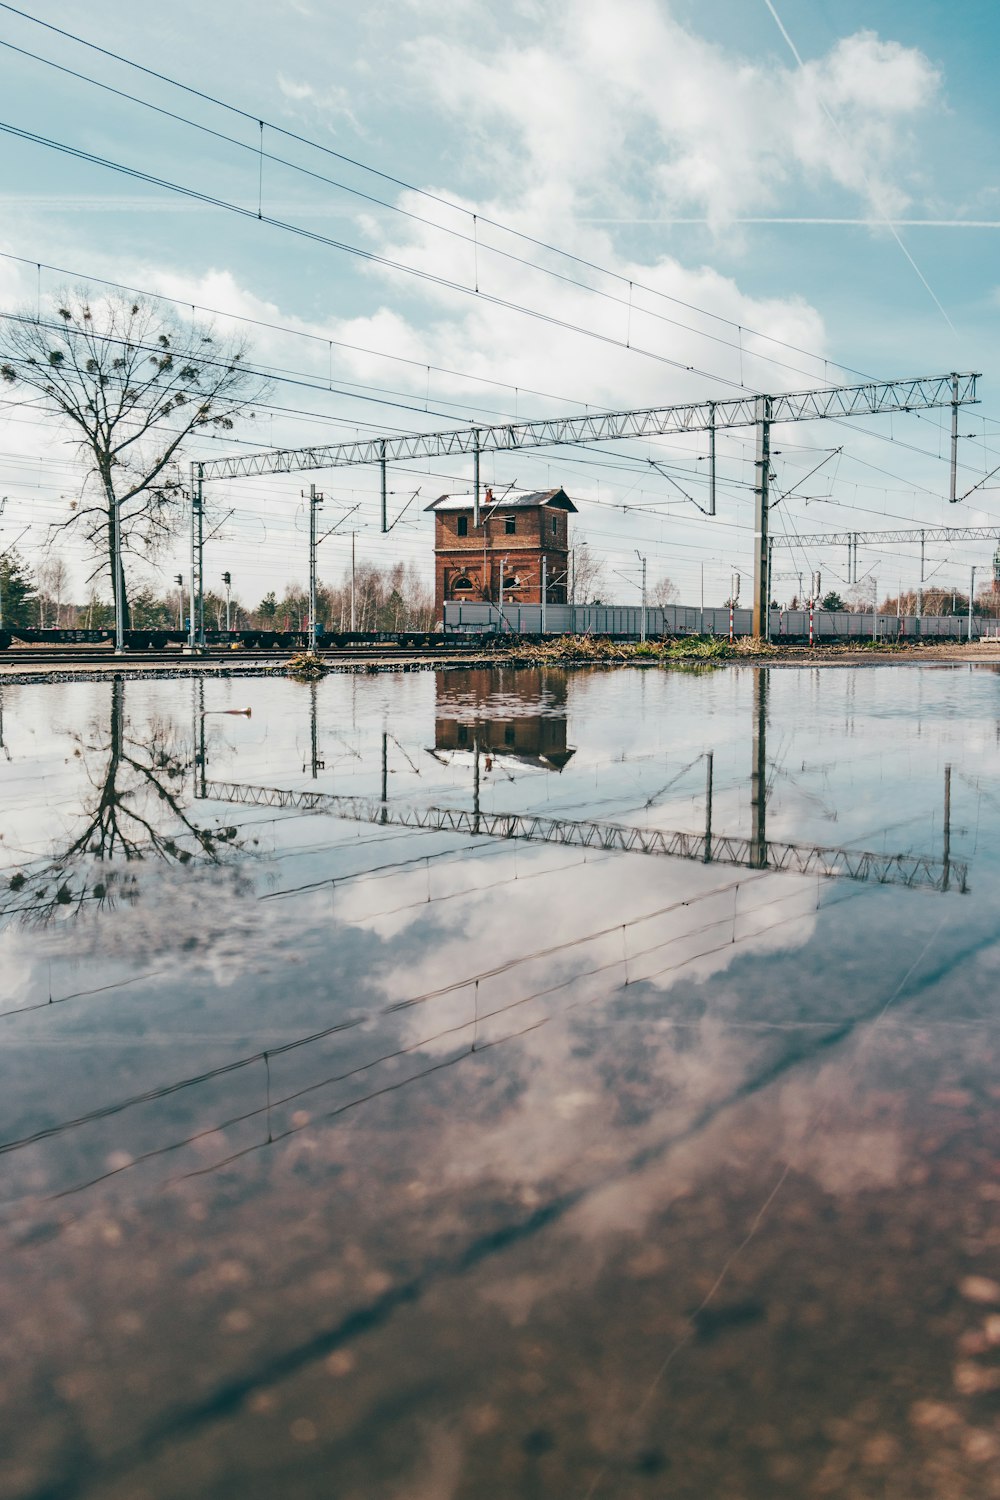 a flooded area with power lines and a building in the background